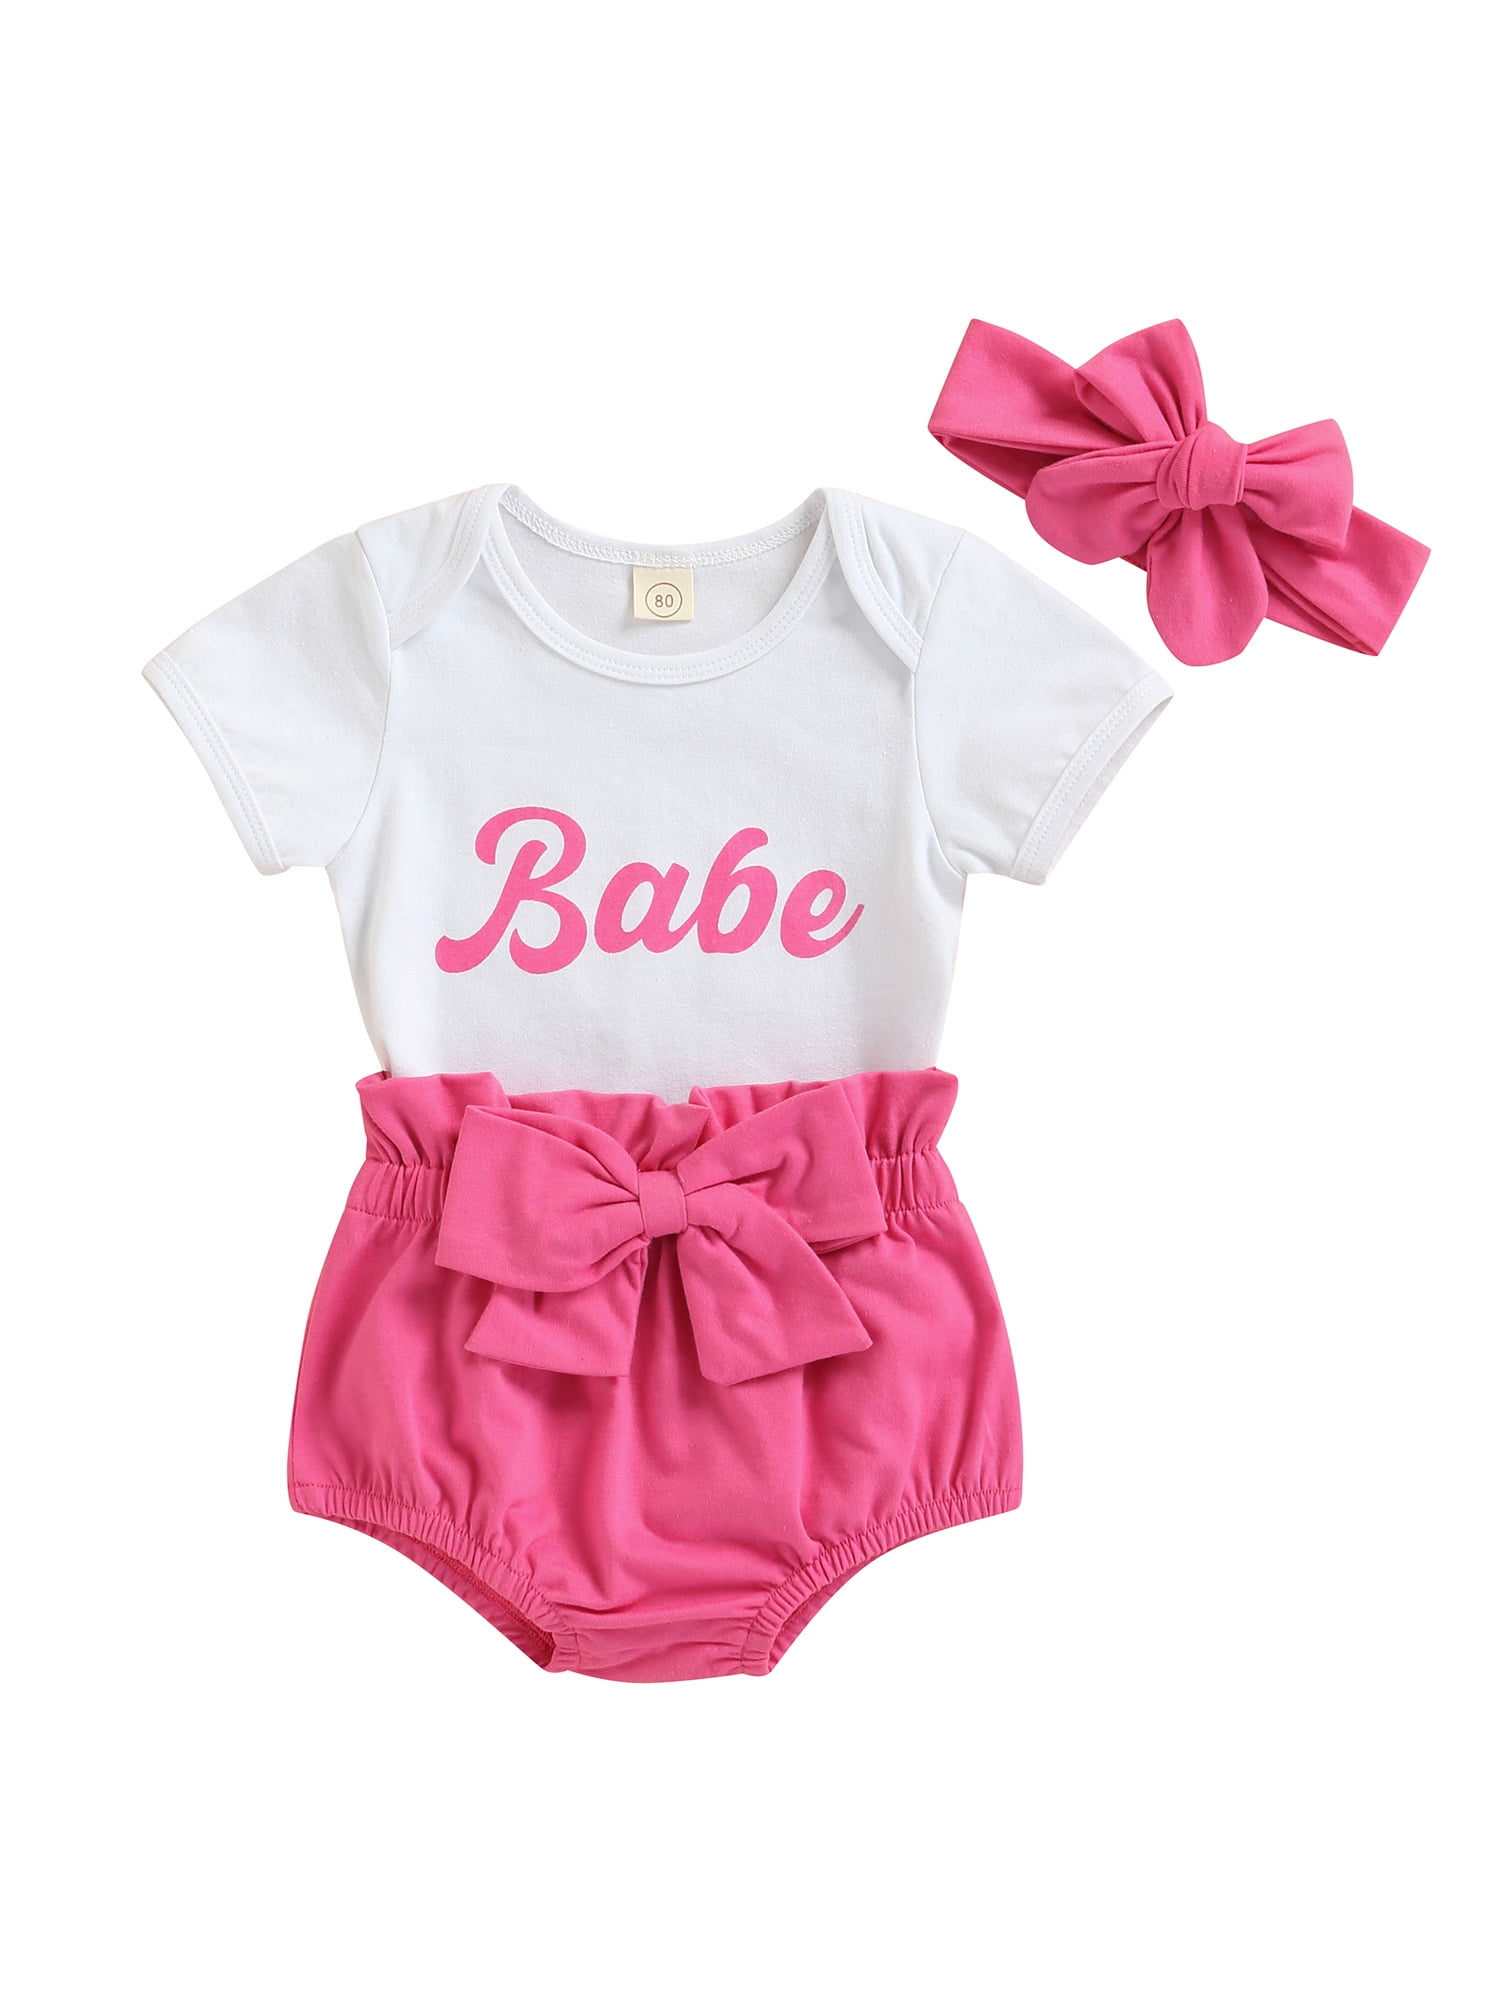 Imcute Infant Baby Girl Summer Outfit Babe Letter Print Short Sleeve Romper  Bowknot Bloomer Shorts 3pcs Clothes Set Pink 12-18 Months - Walmart.com